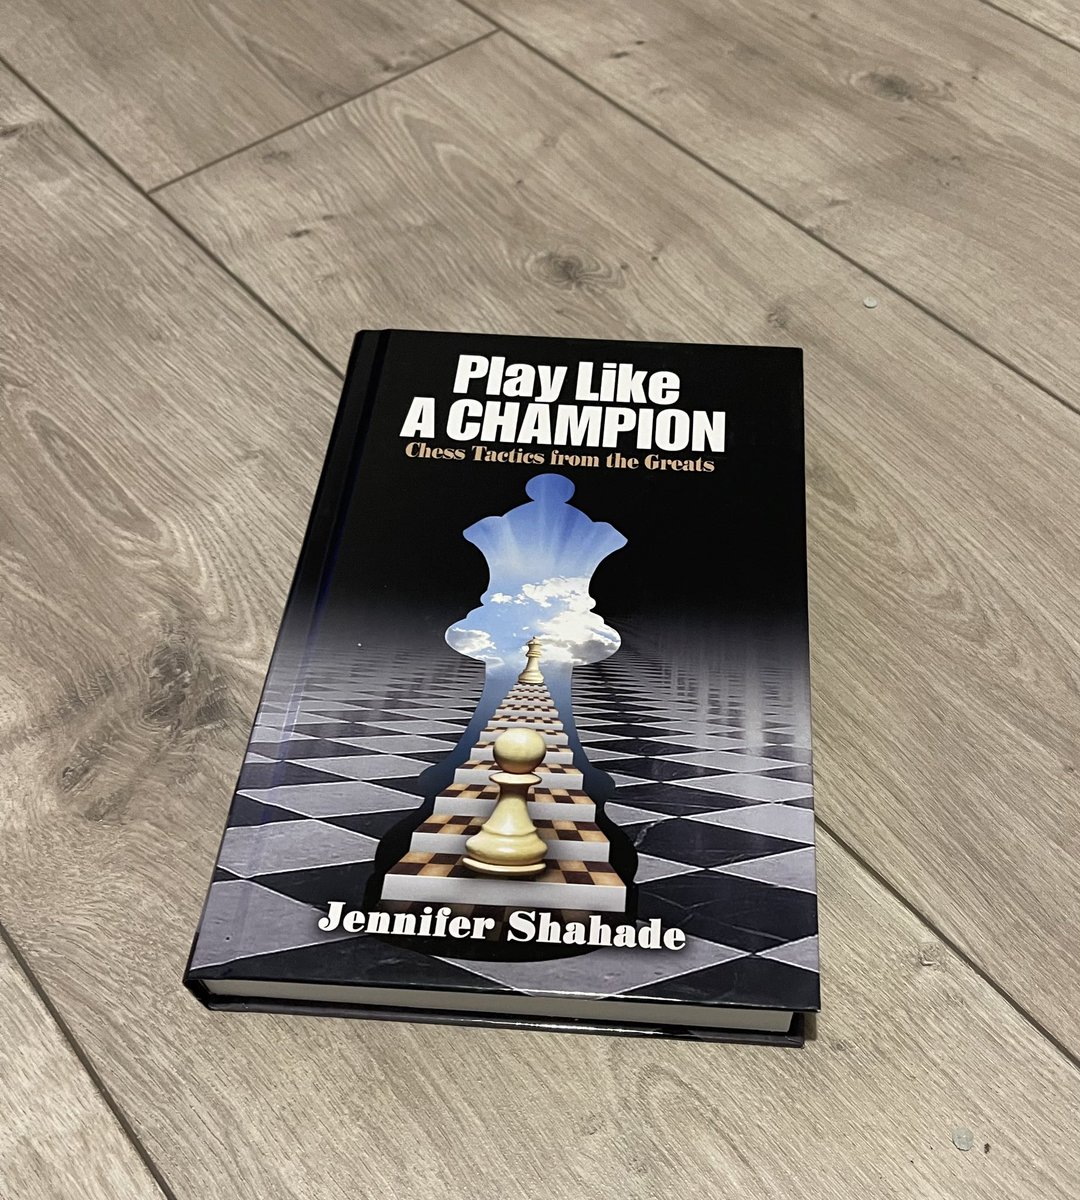 @JenShahade Play Like a Champion has arrived. Thank you 🙏 Jen. The book is a candidate for chess book of the year.
@MongoosePress @USChess @ecfchess @ChessAndBridge #chesspunks #chess #BookoftheYear